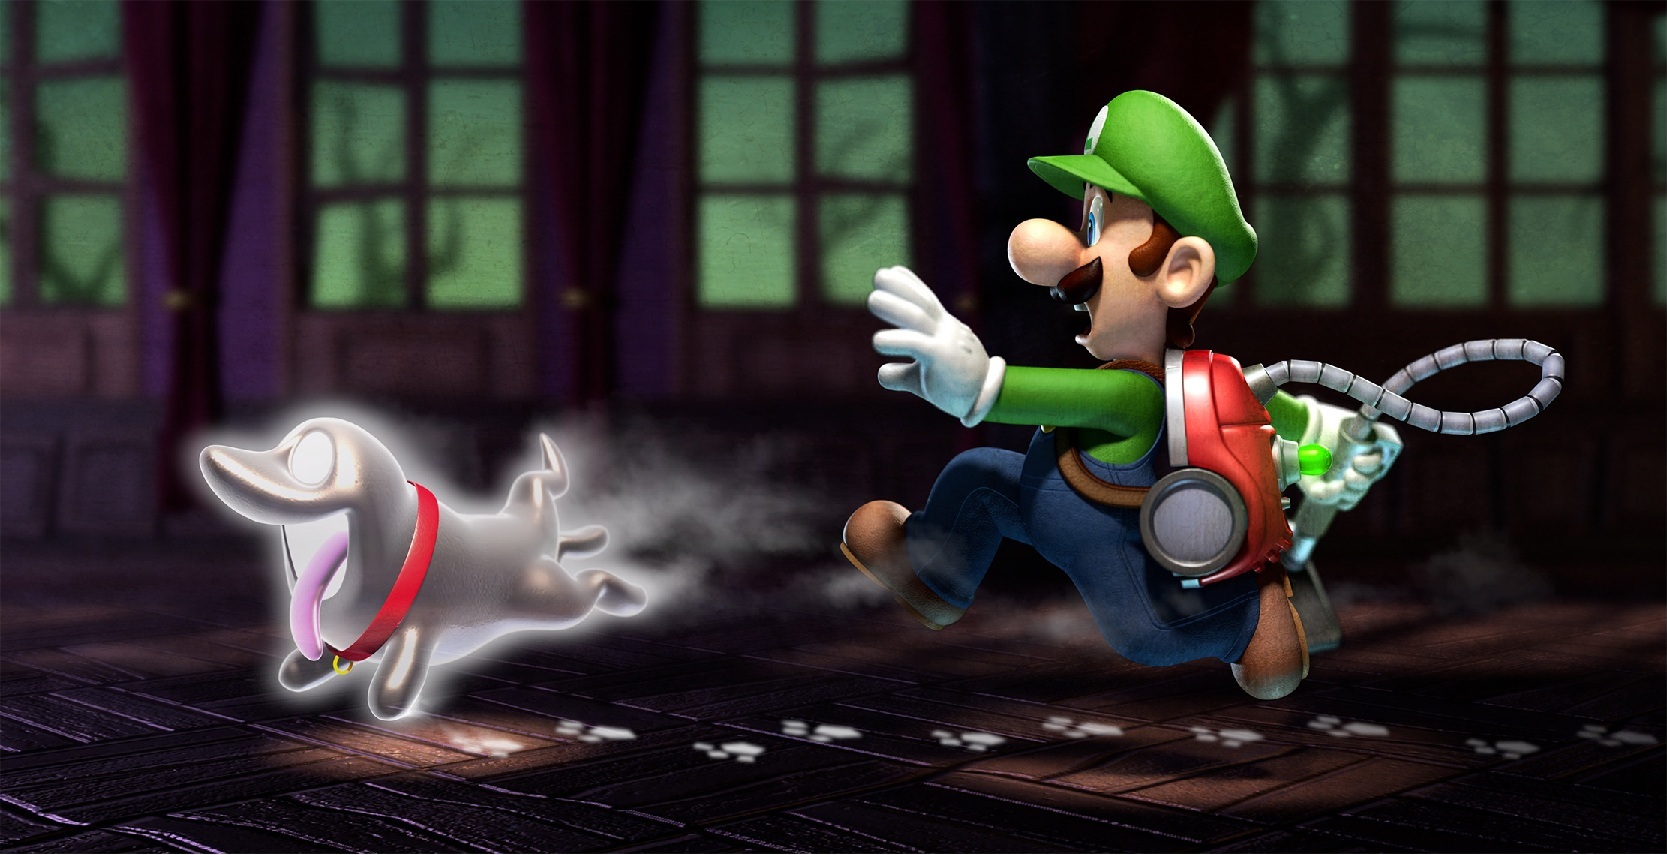 nintendo-declares-2013-to-be-the-year-of-luigi-fanboy